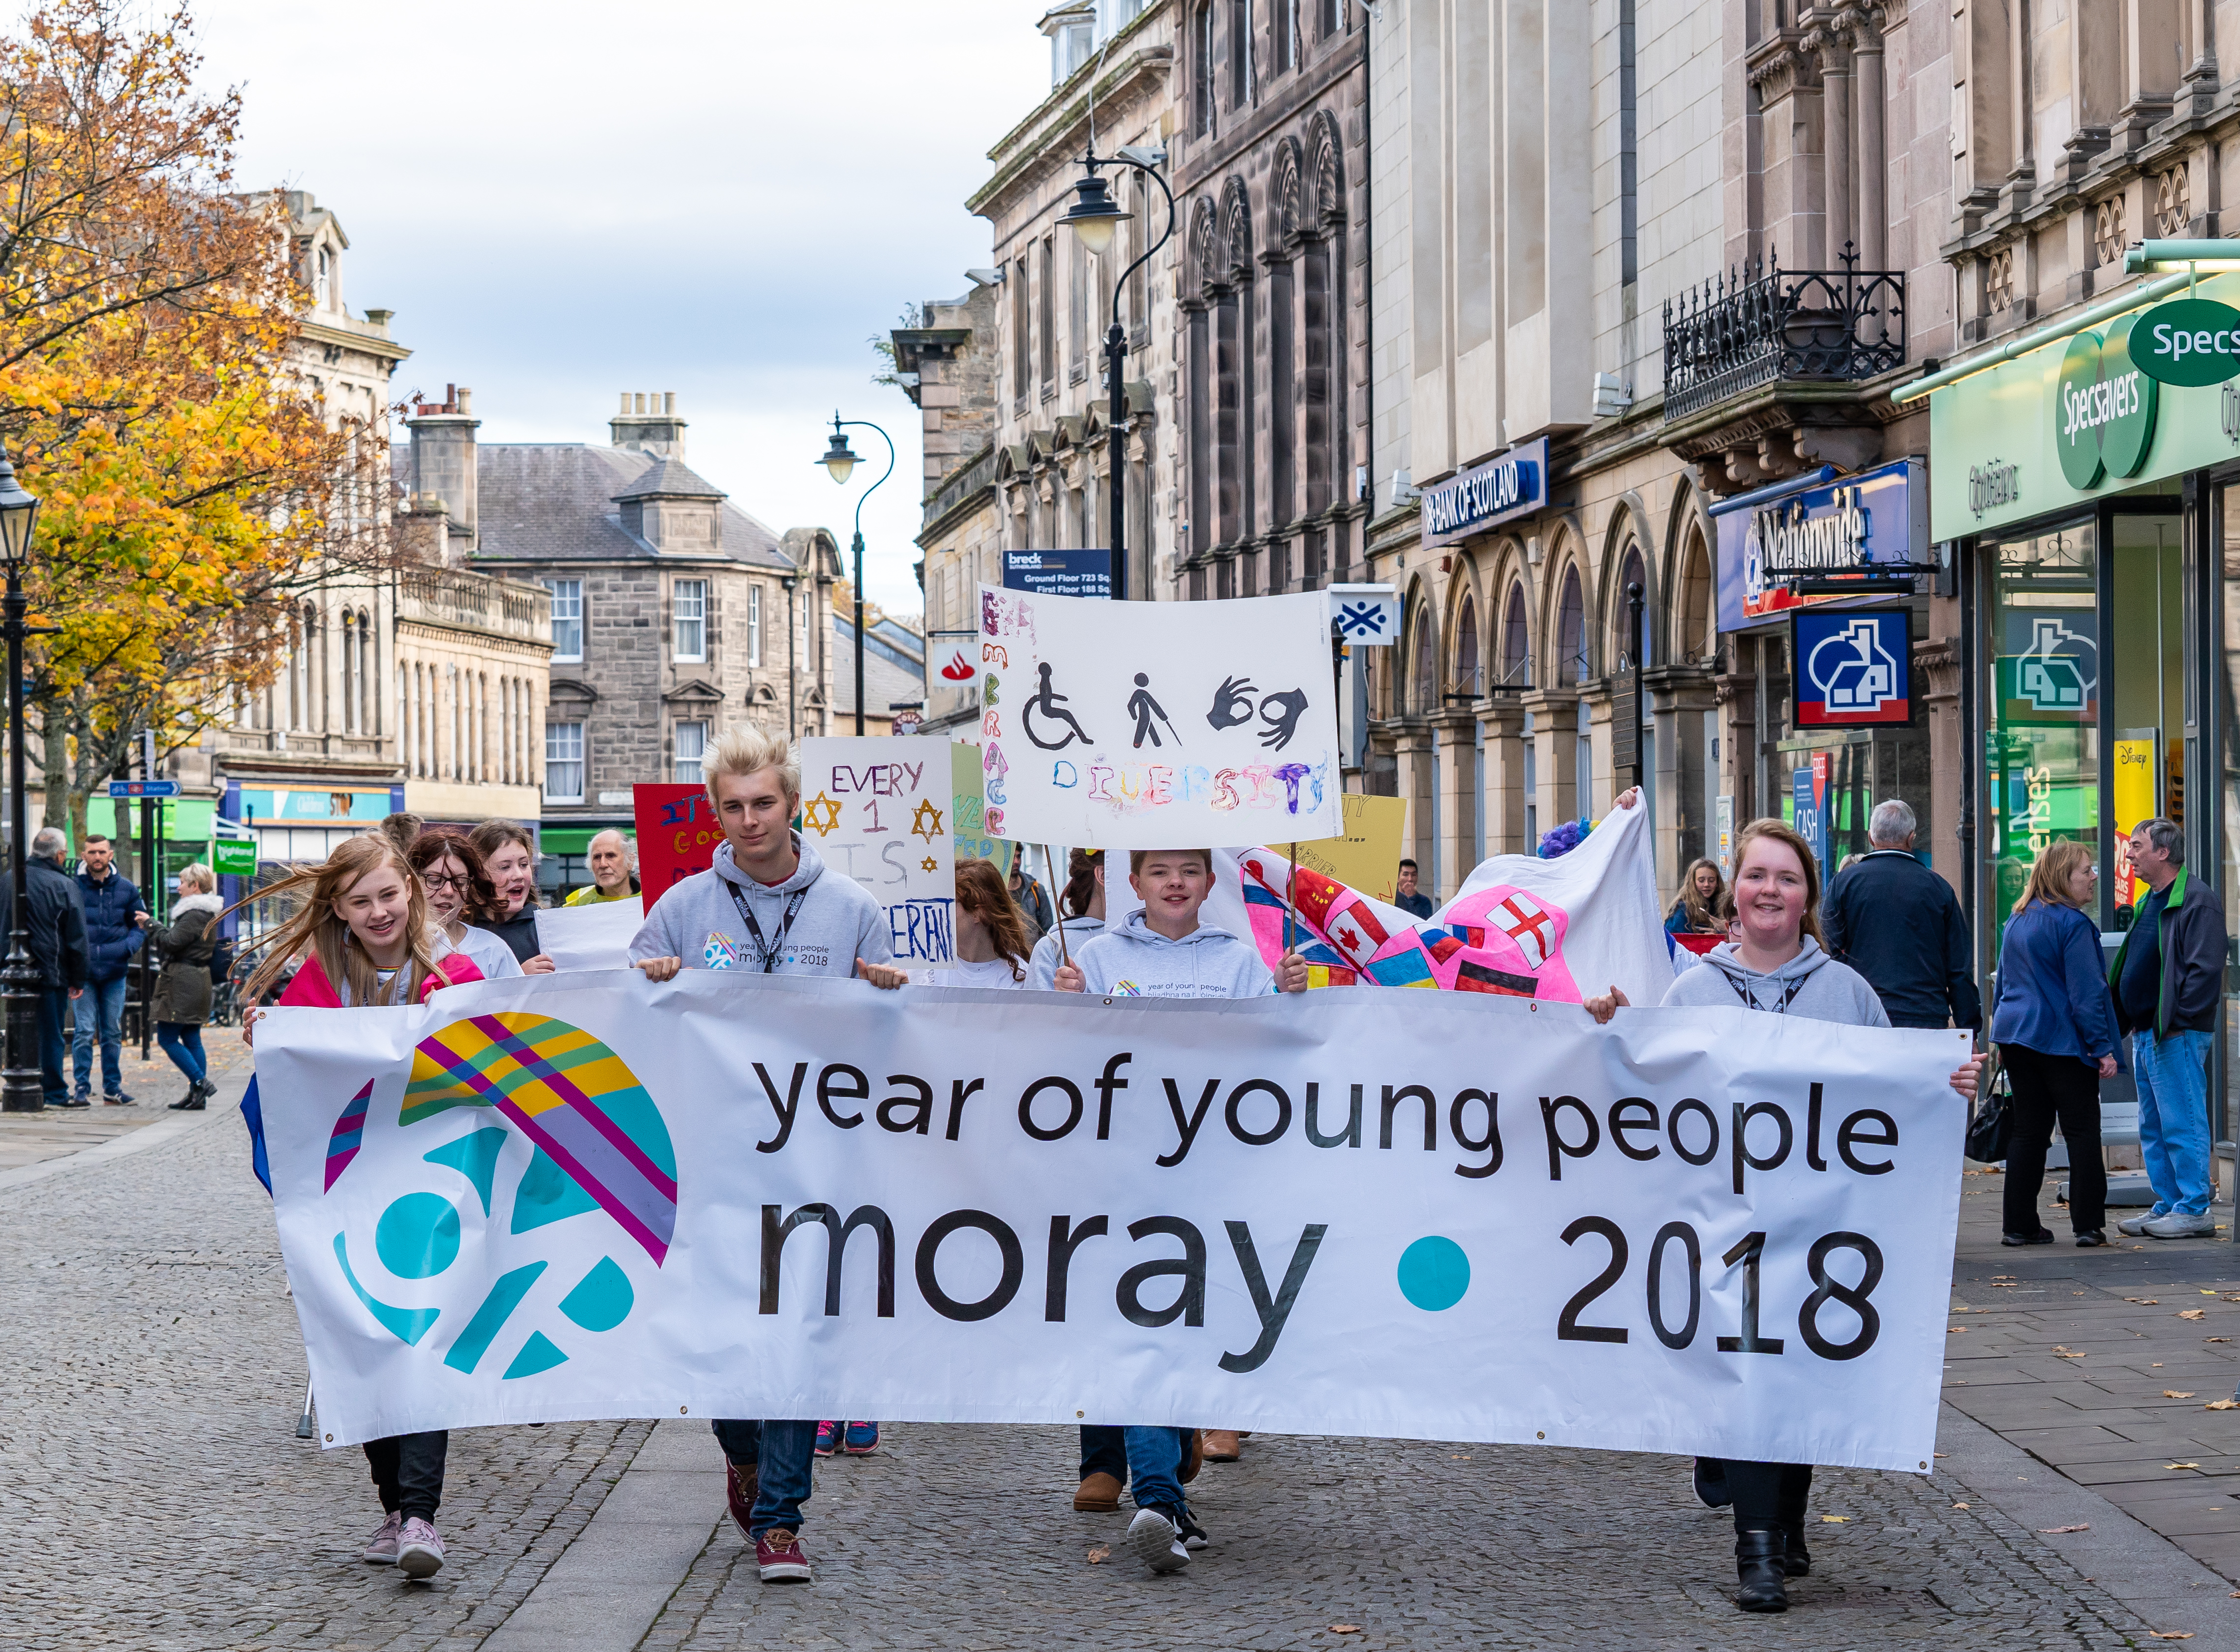 A march organised by Elgin Youth Cafe